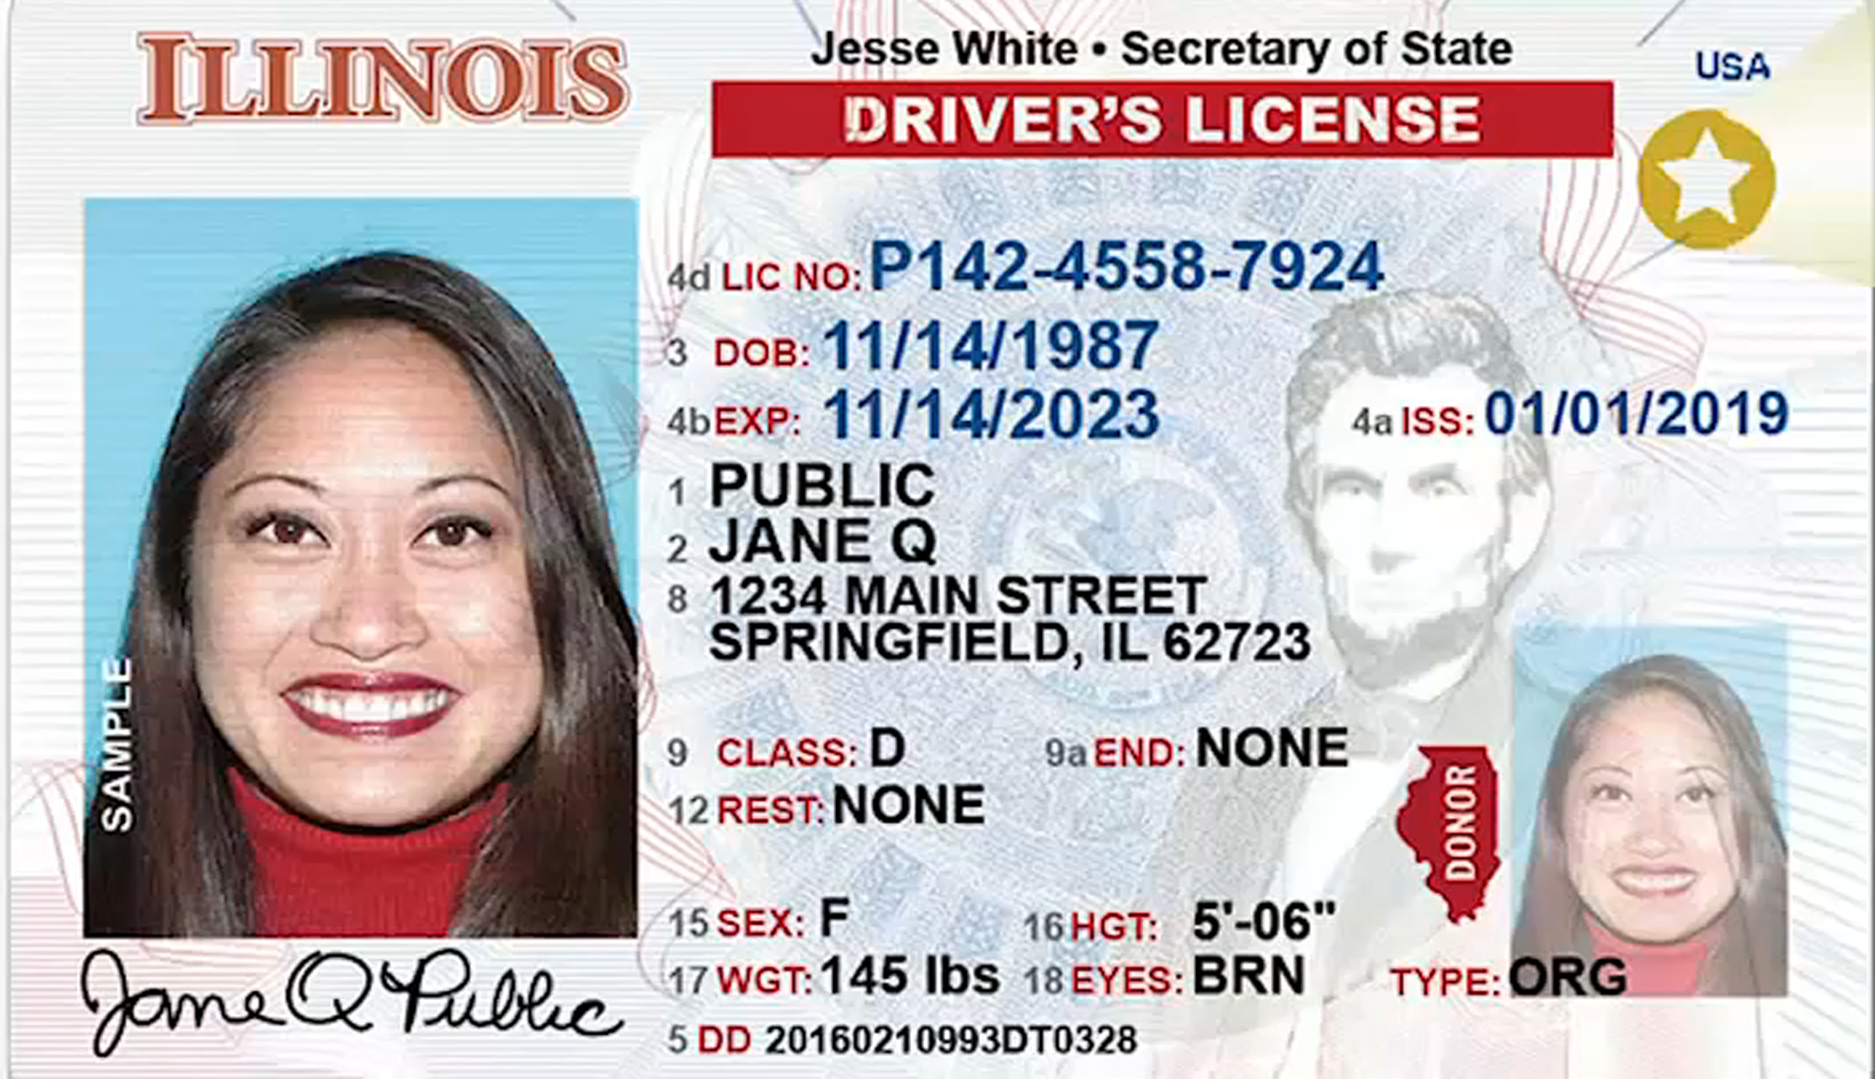 difference between an id and a driver's license